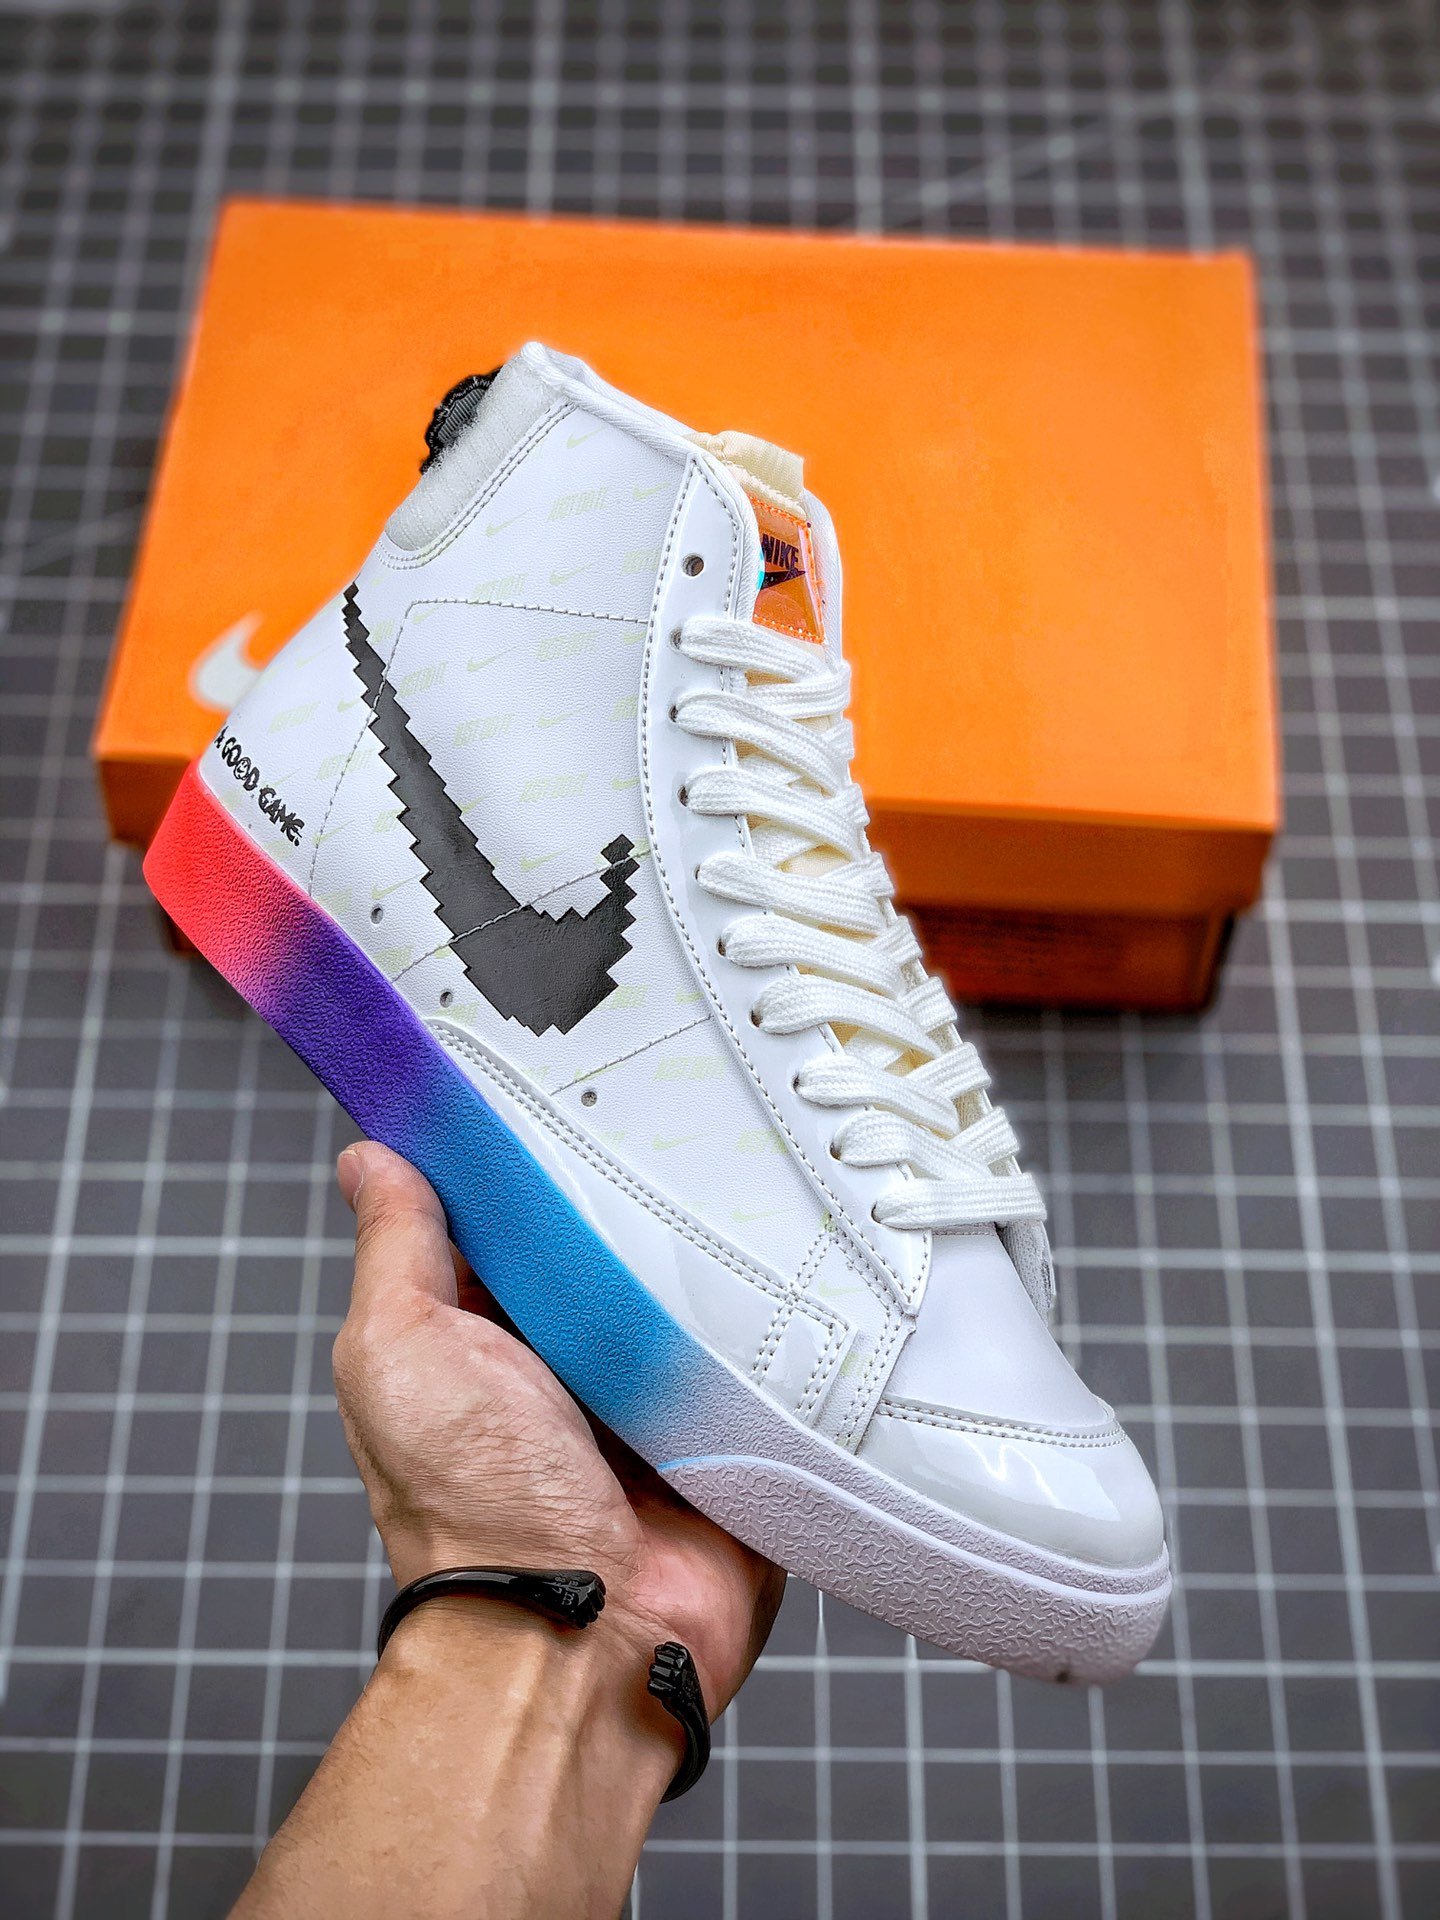 Nike Blazer Mid '77 Vintage "Have A Good Game" Shoes